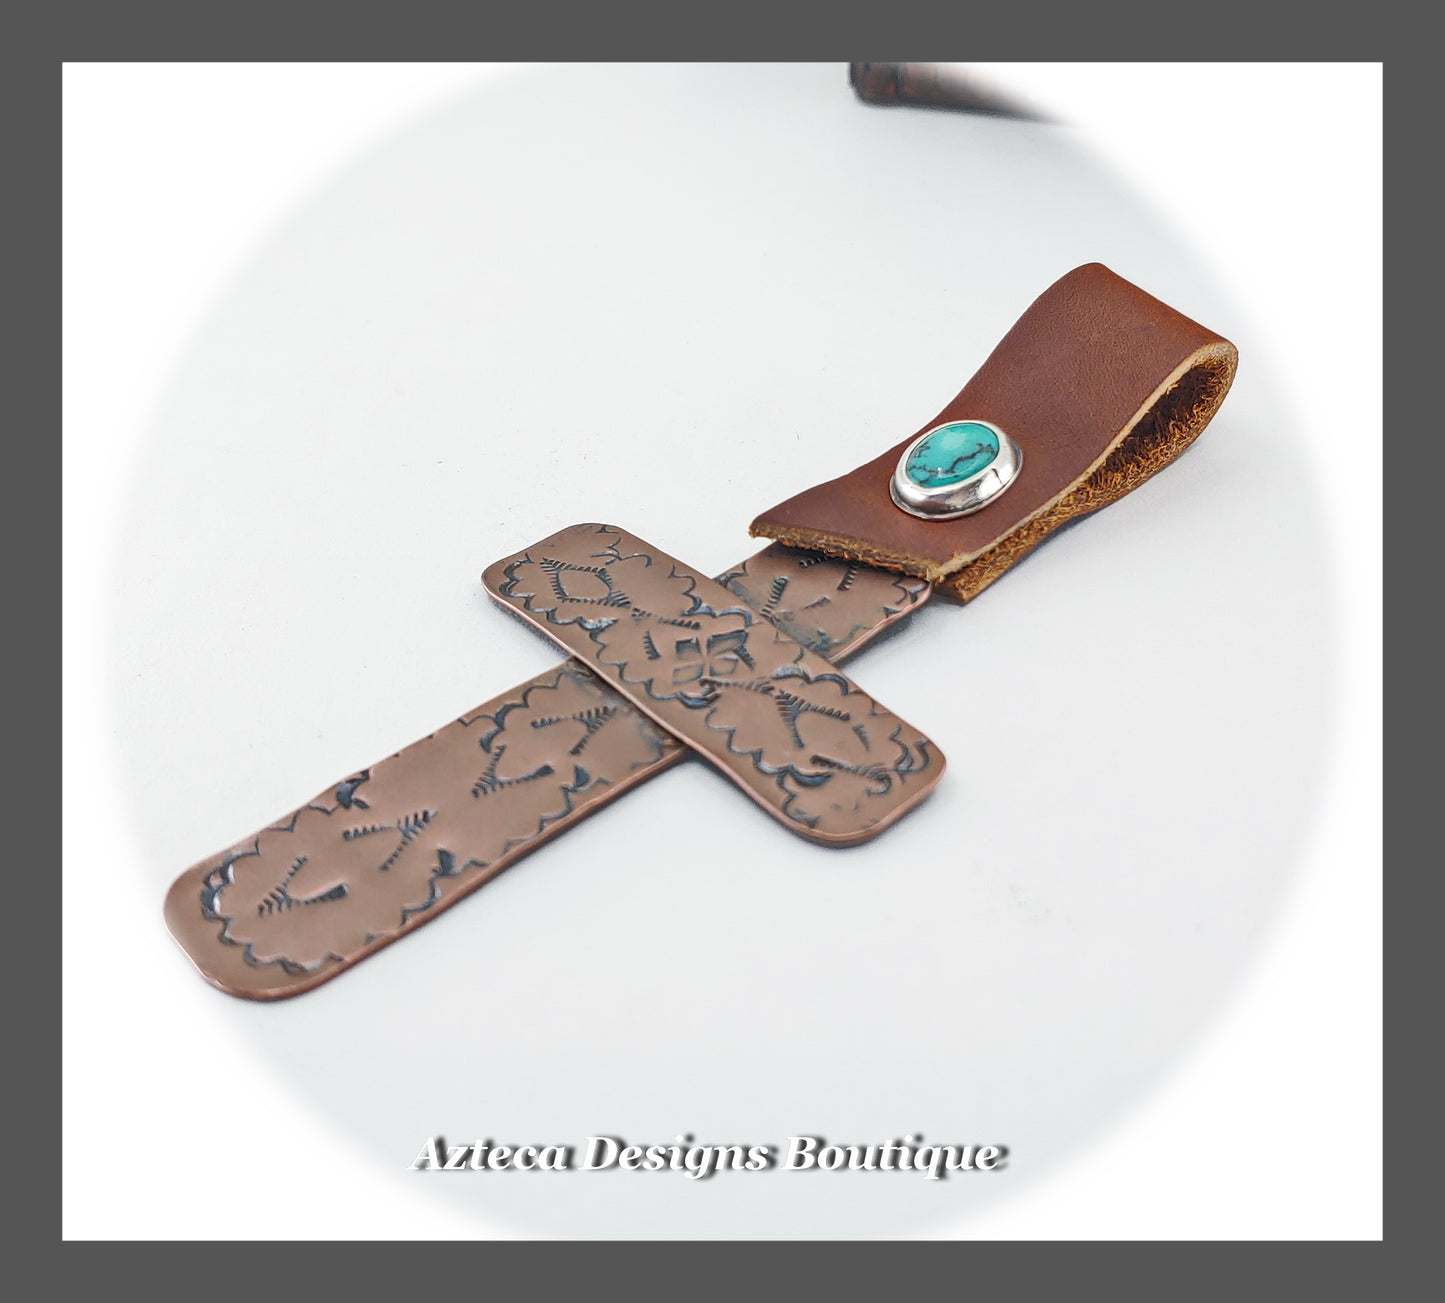 Hand Stamped Rustic Copper + Turquoise + Leather Cross Pendant